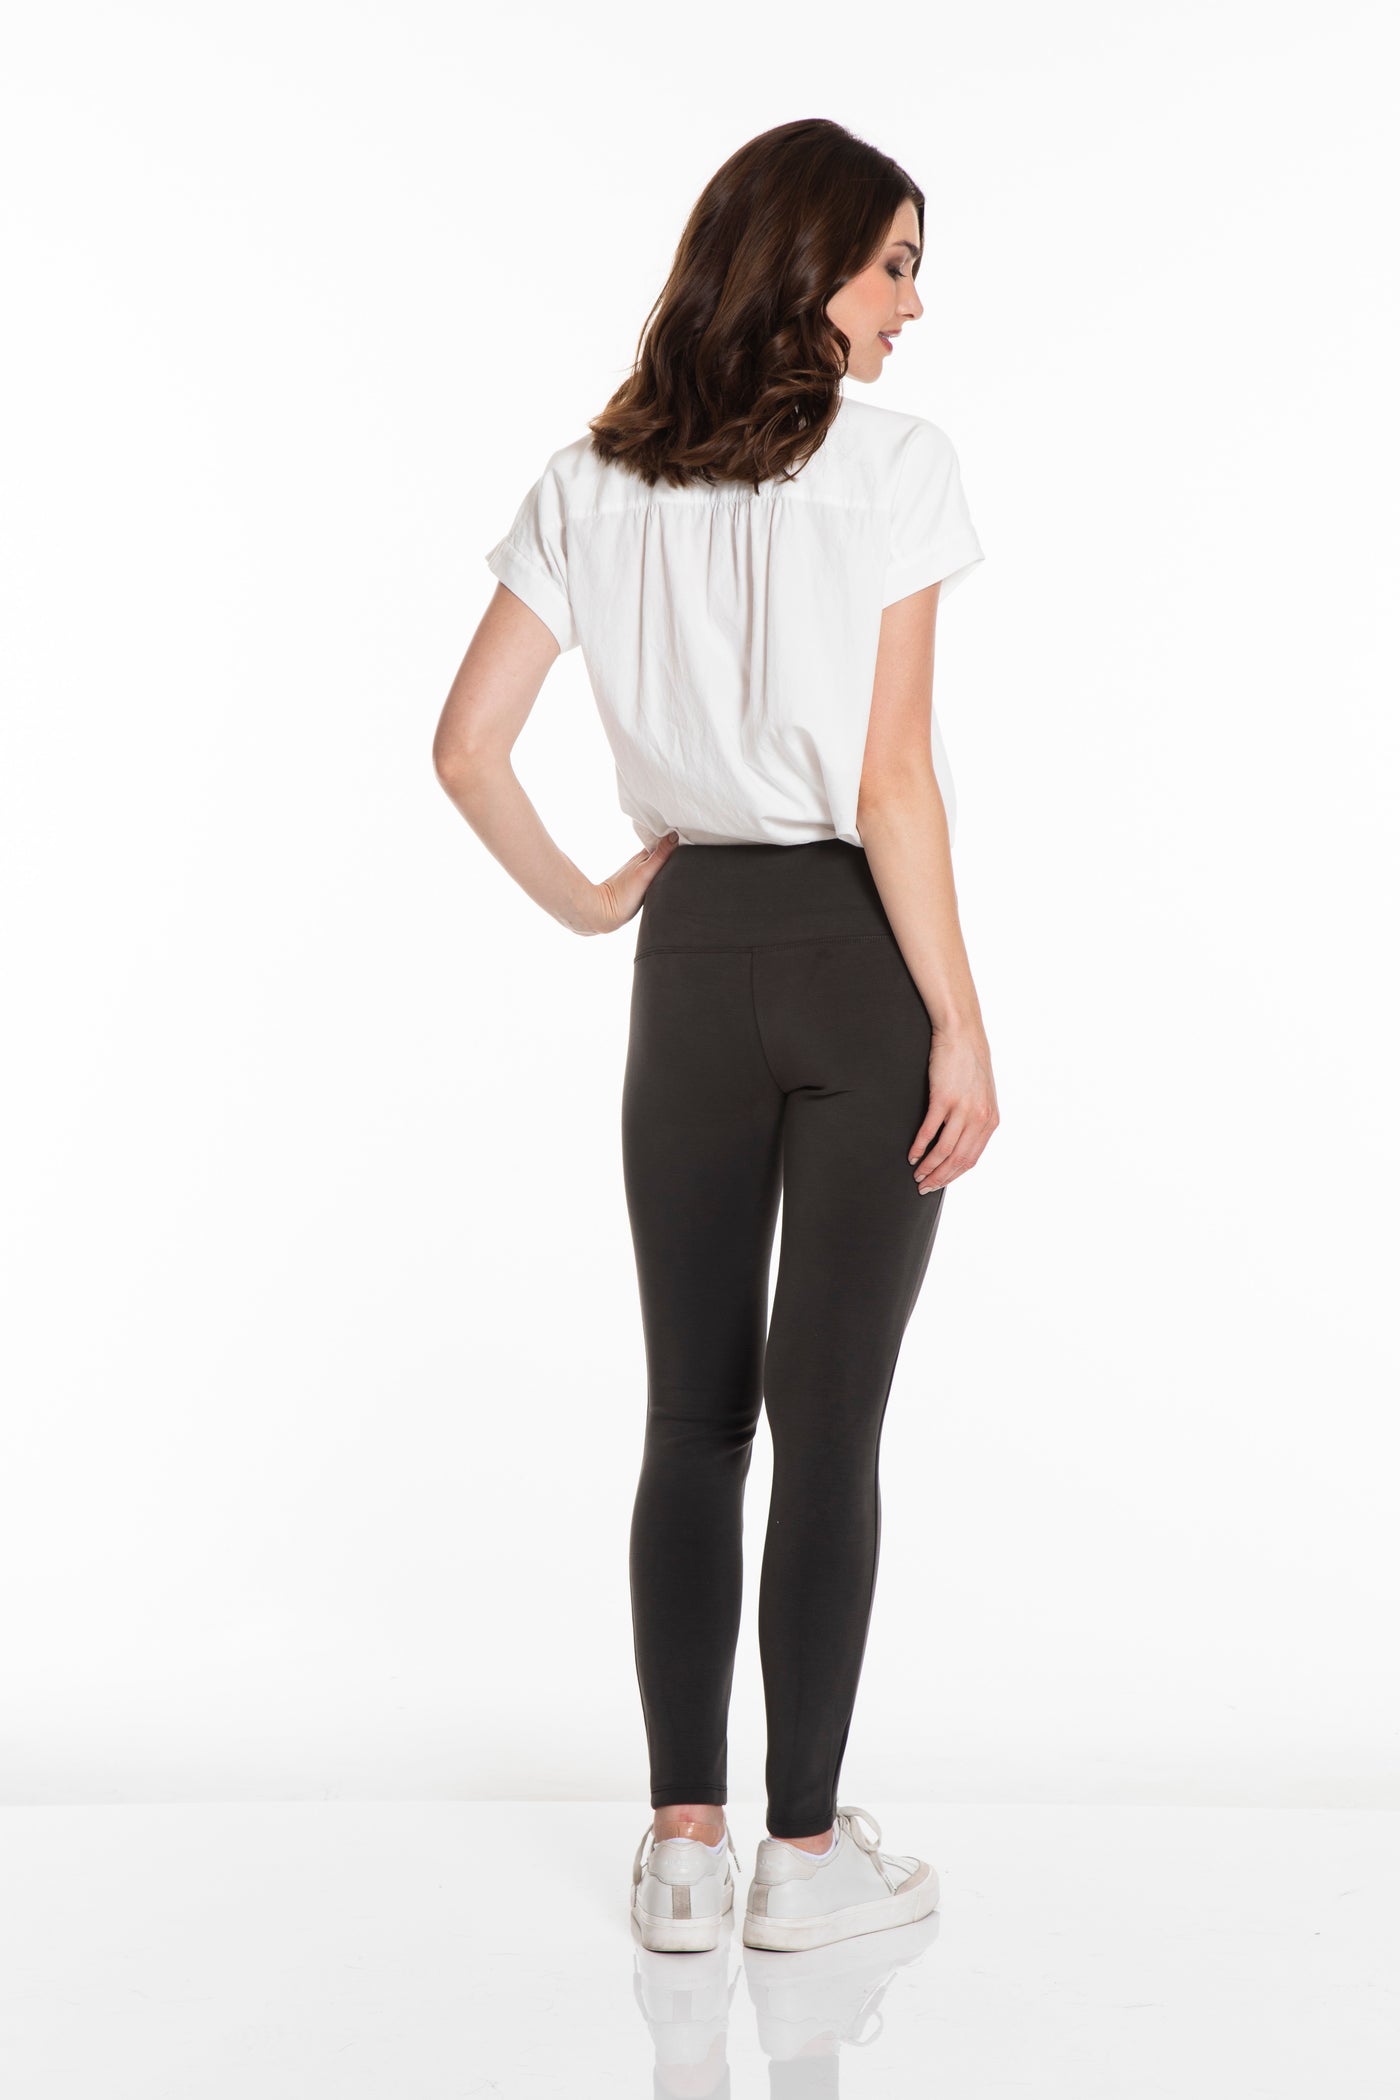 PLUS WIDE BAND PULL-ON ANKLE LEGGING - Deep Charcoal